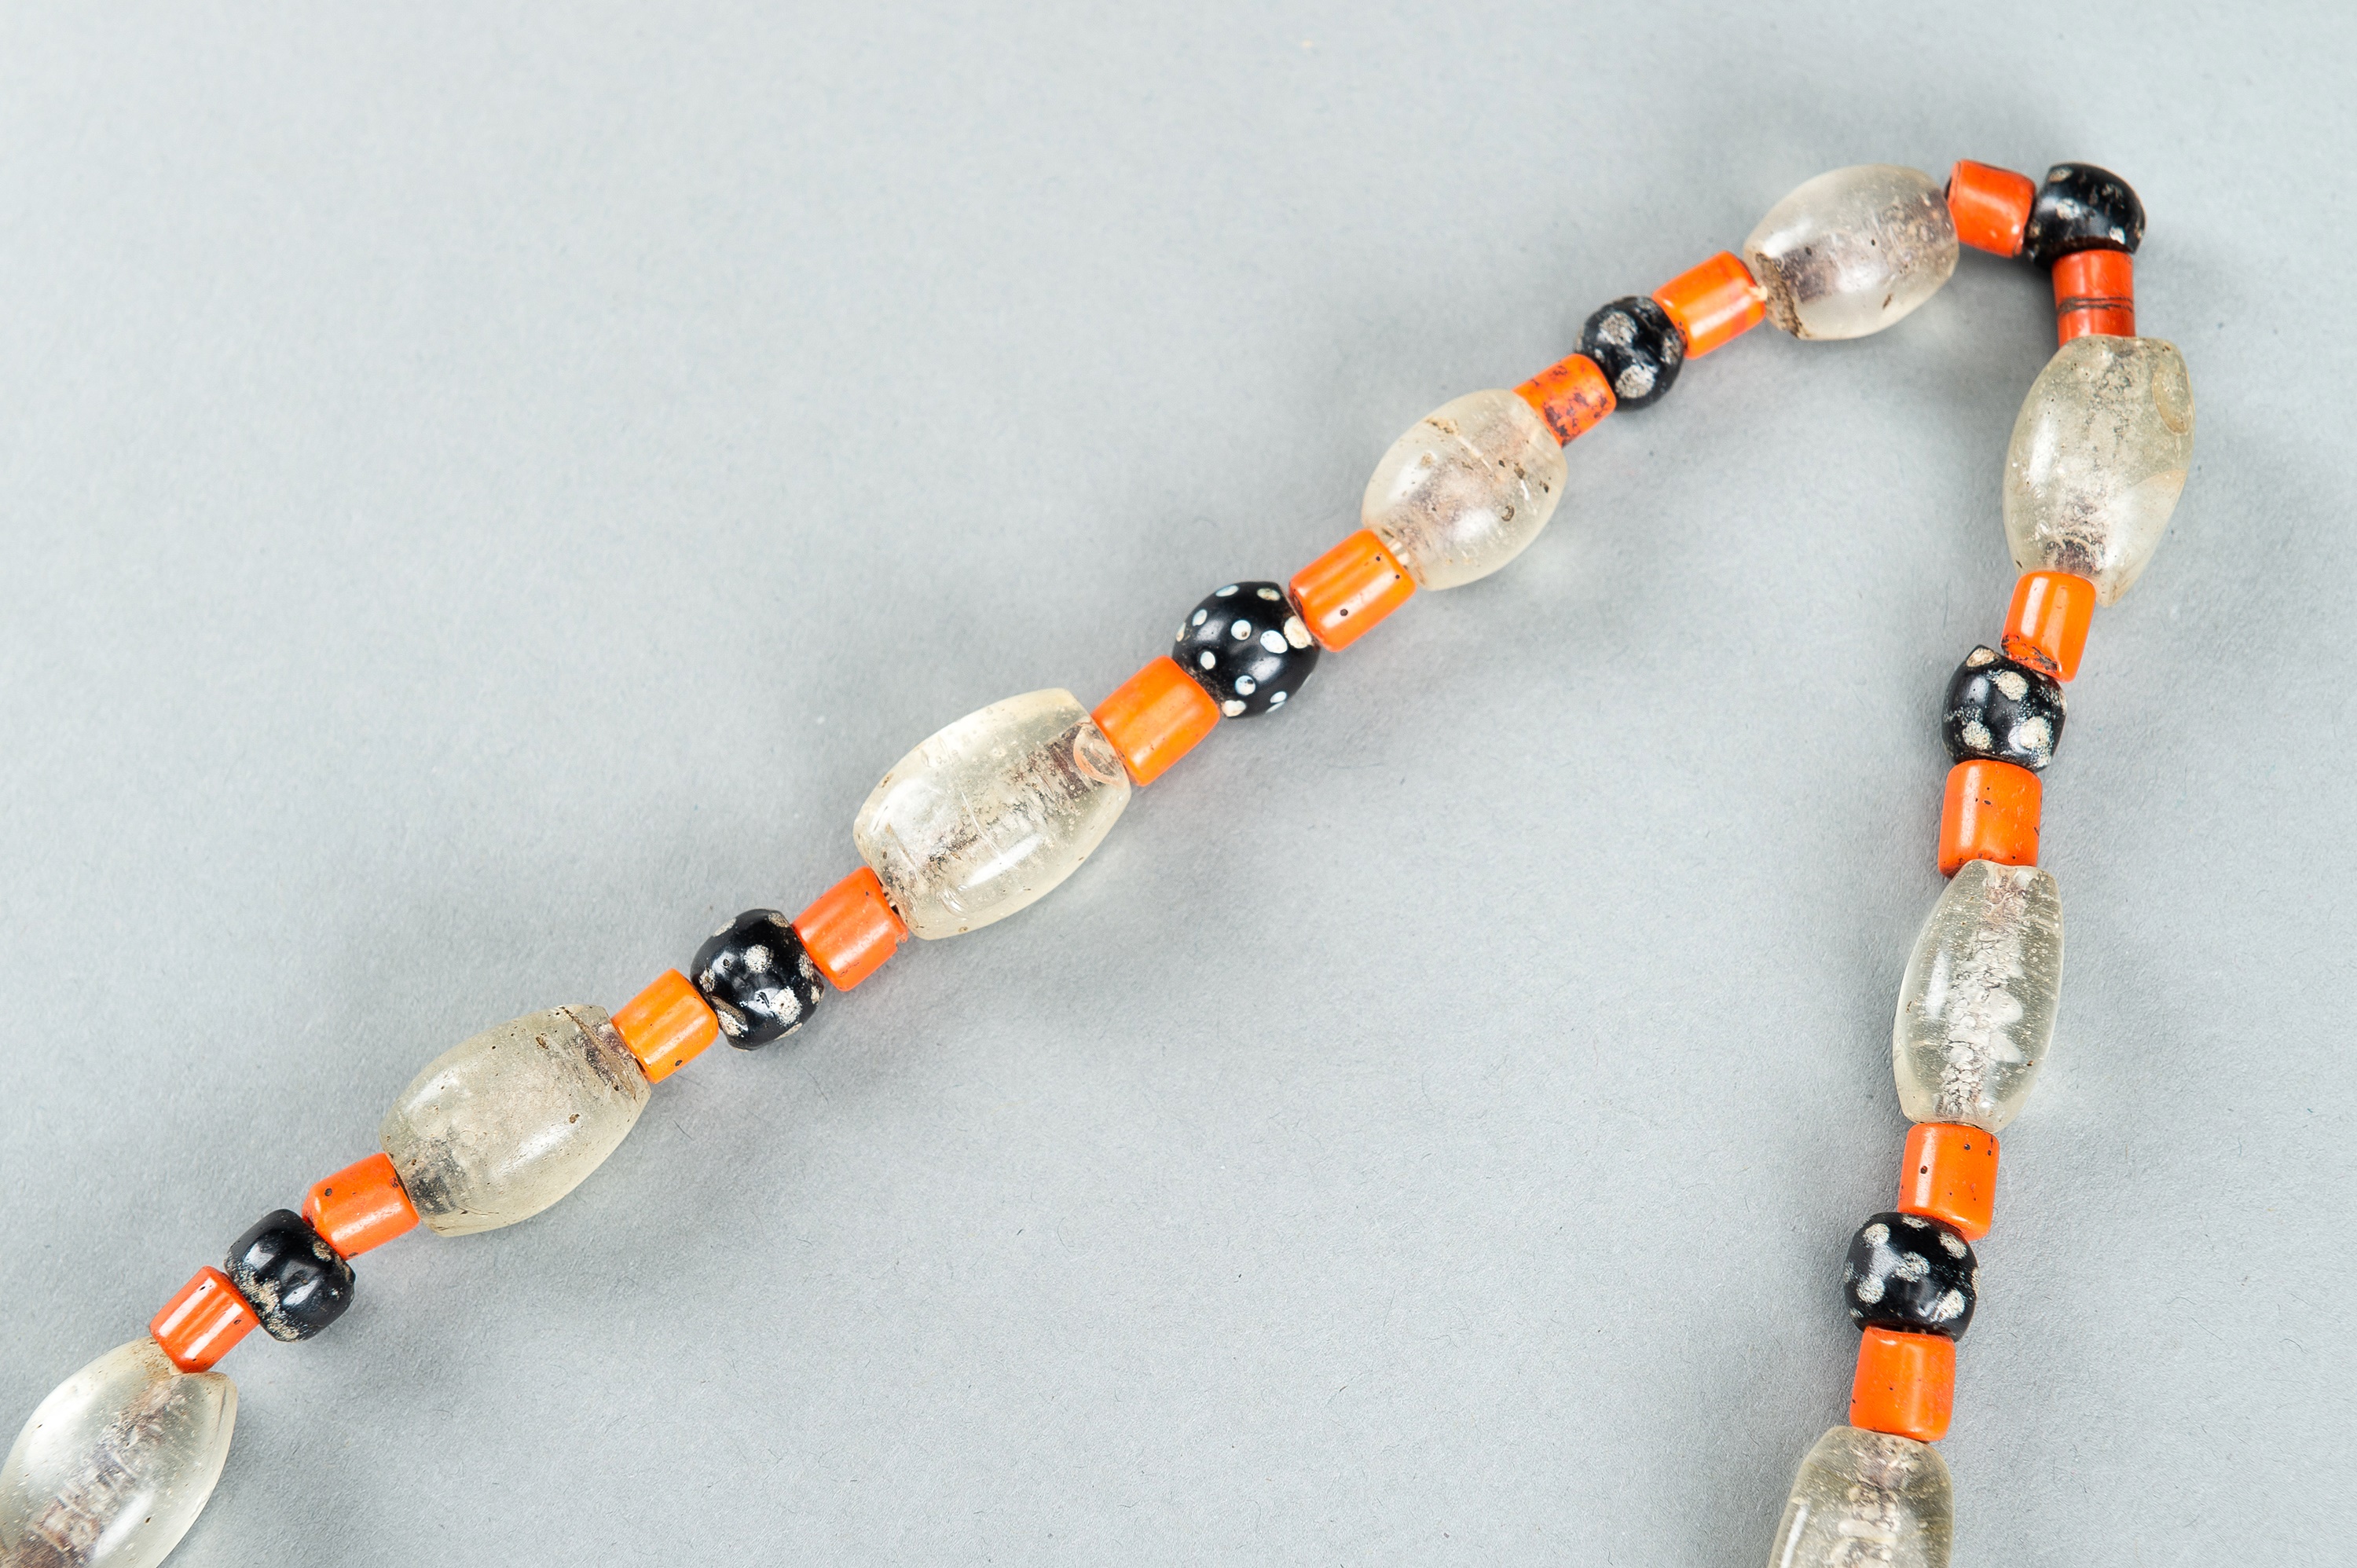 A MULTI-COLORED NAGALAND GLASS NECKLACE, c. 1900s - Image 8 of 10